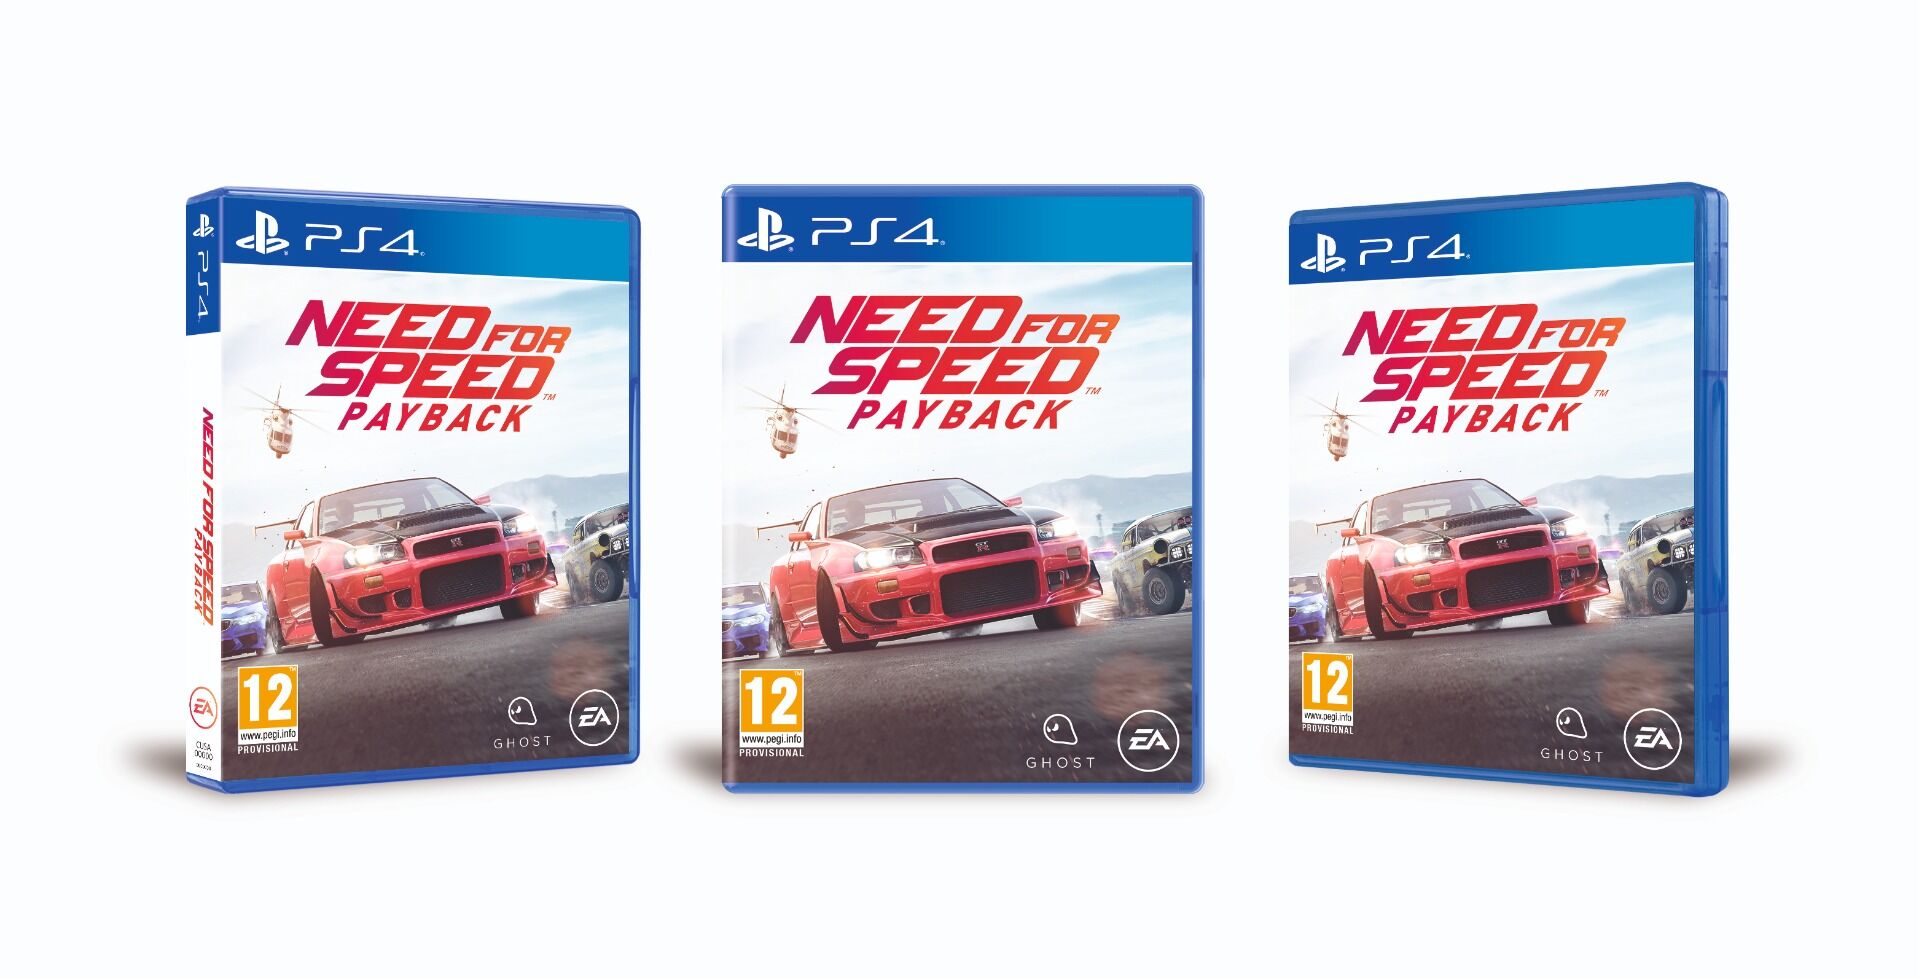 Nfs payback ps4. Need for Speed ps4 диск. Need for Speed Payback ps4 диск. Need for Speed Payback пс4.